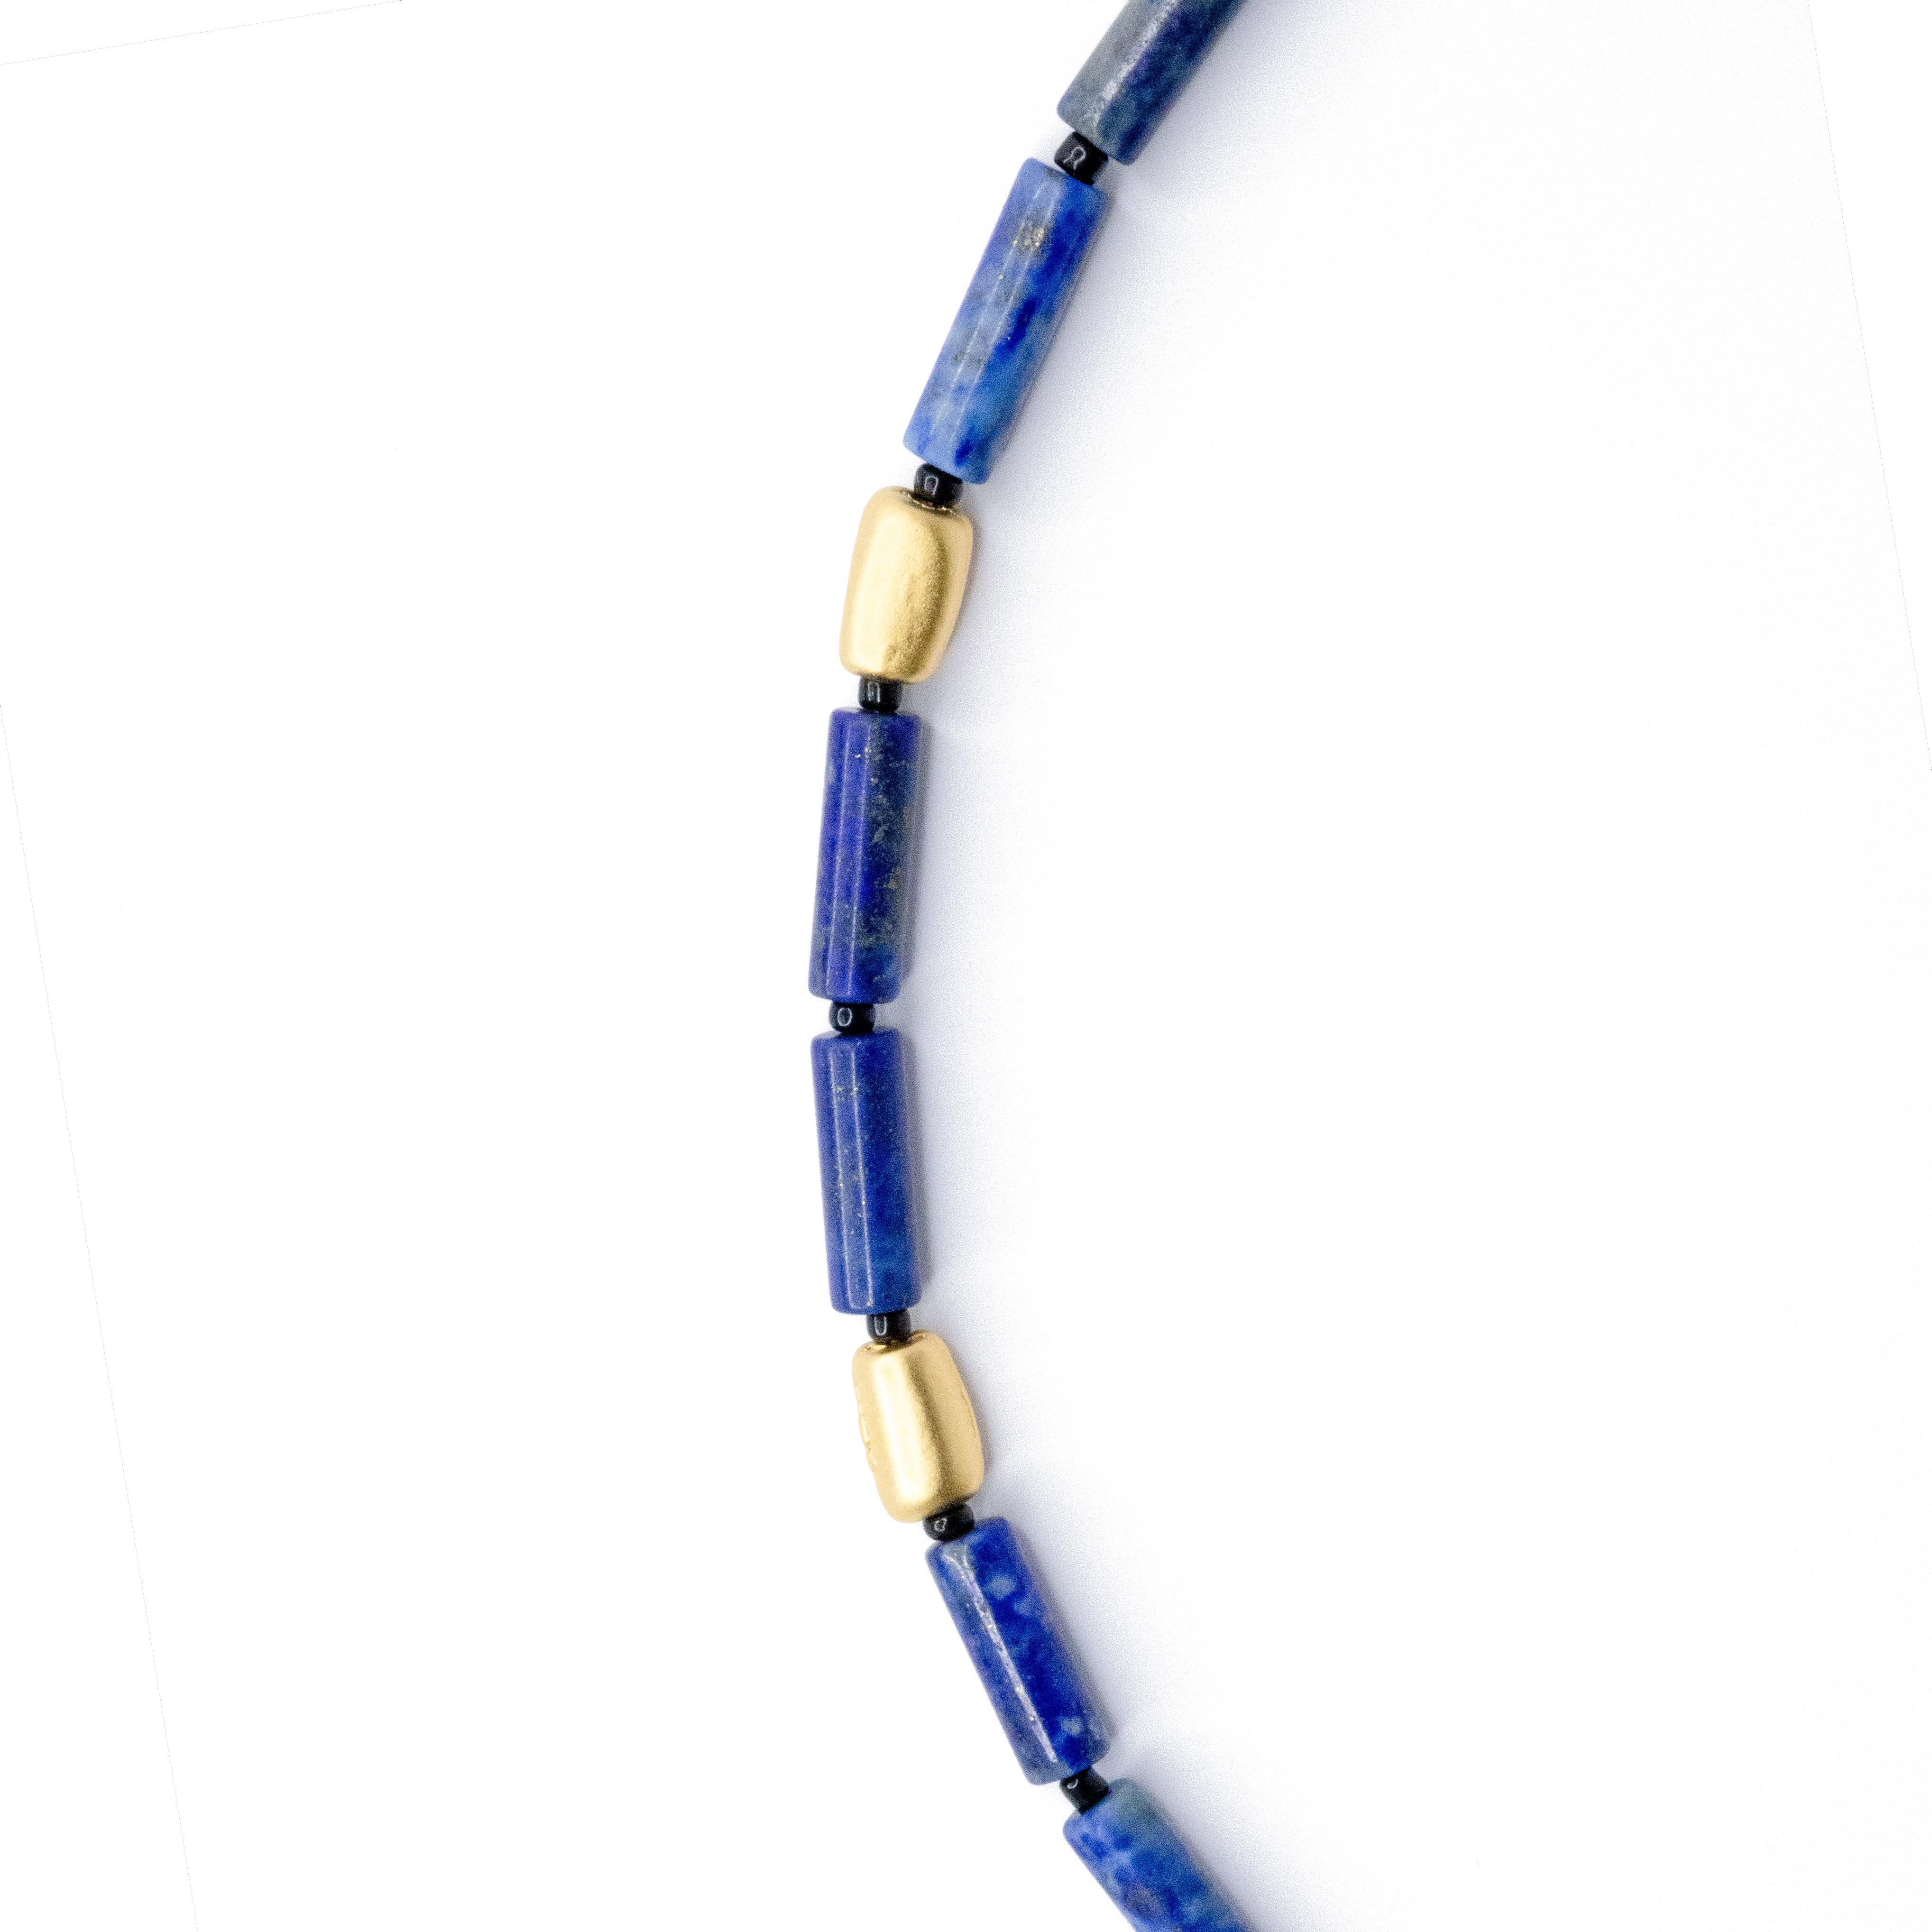 Immerse yourself in the sophisticated simplicity of this Lapis Lazuli necklace, inspired by Salvador Dali's 